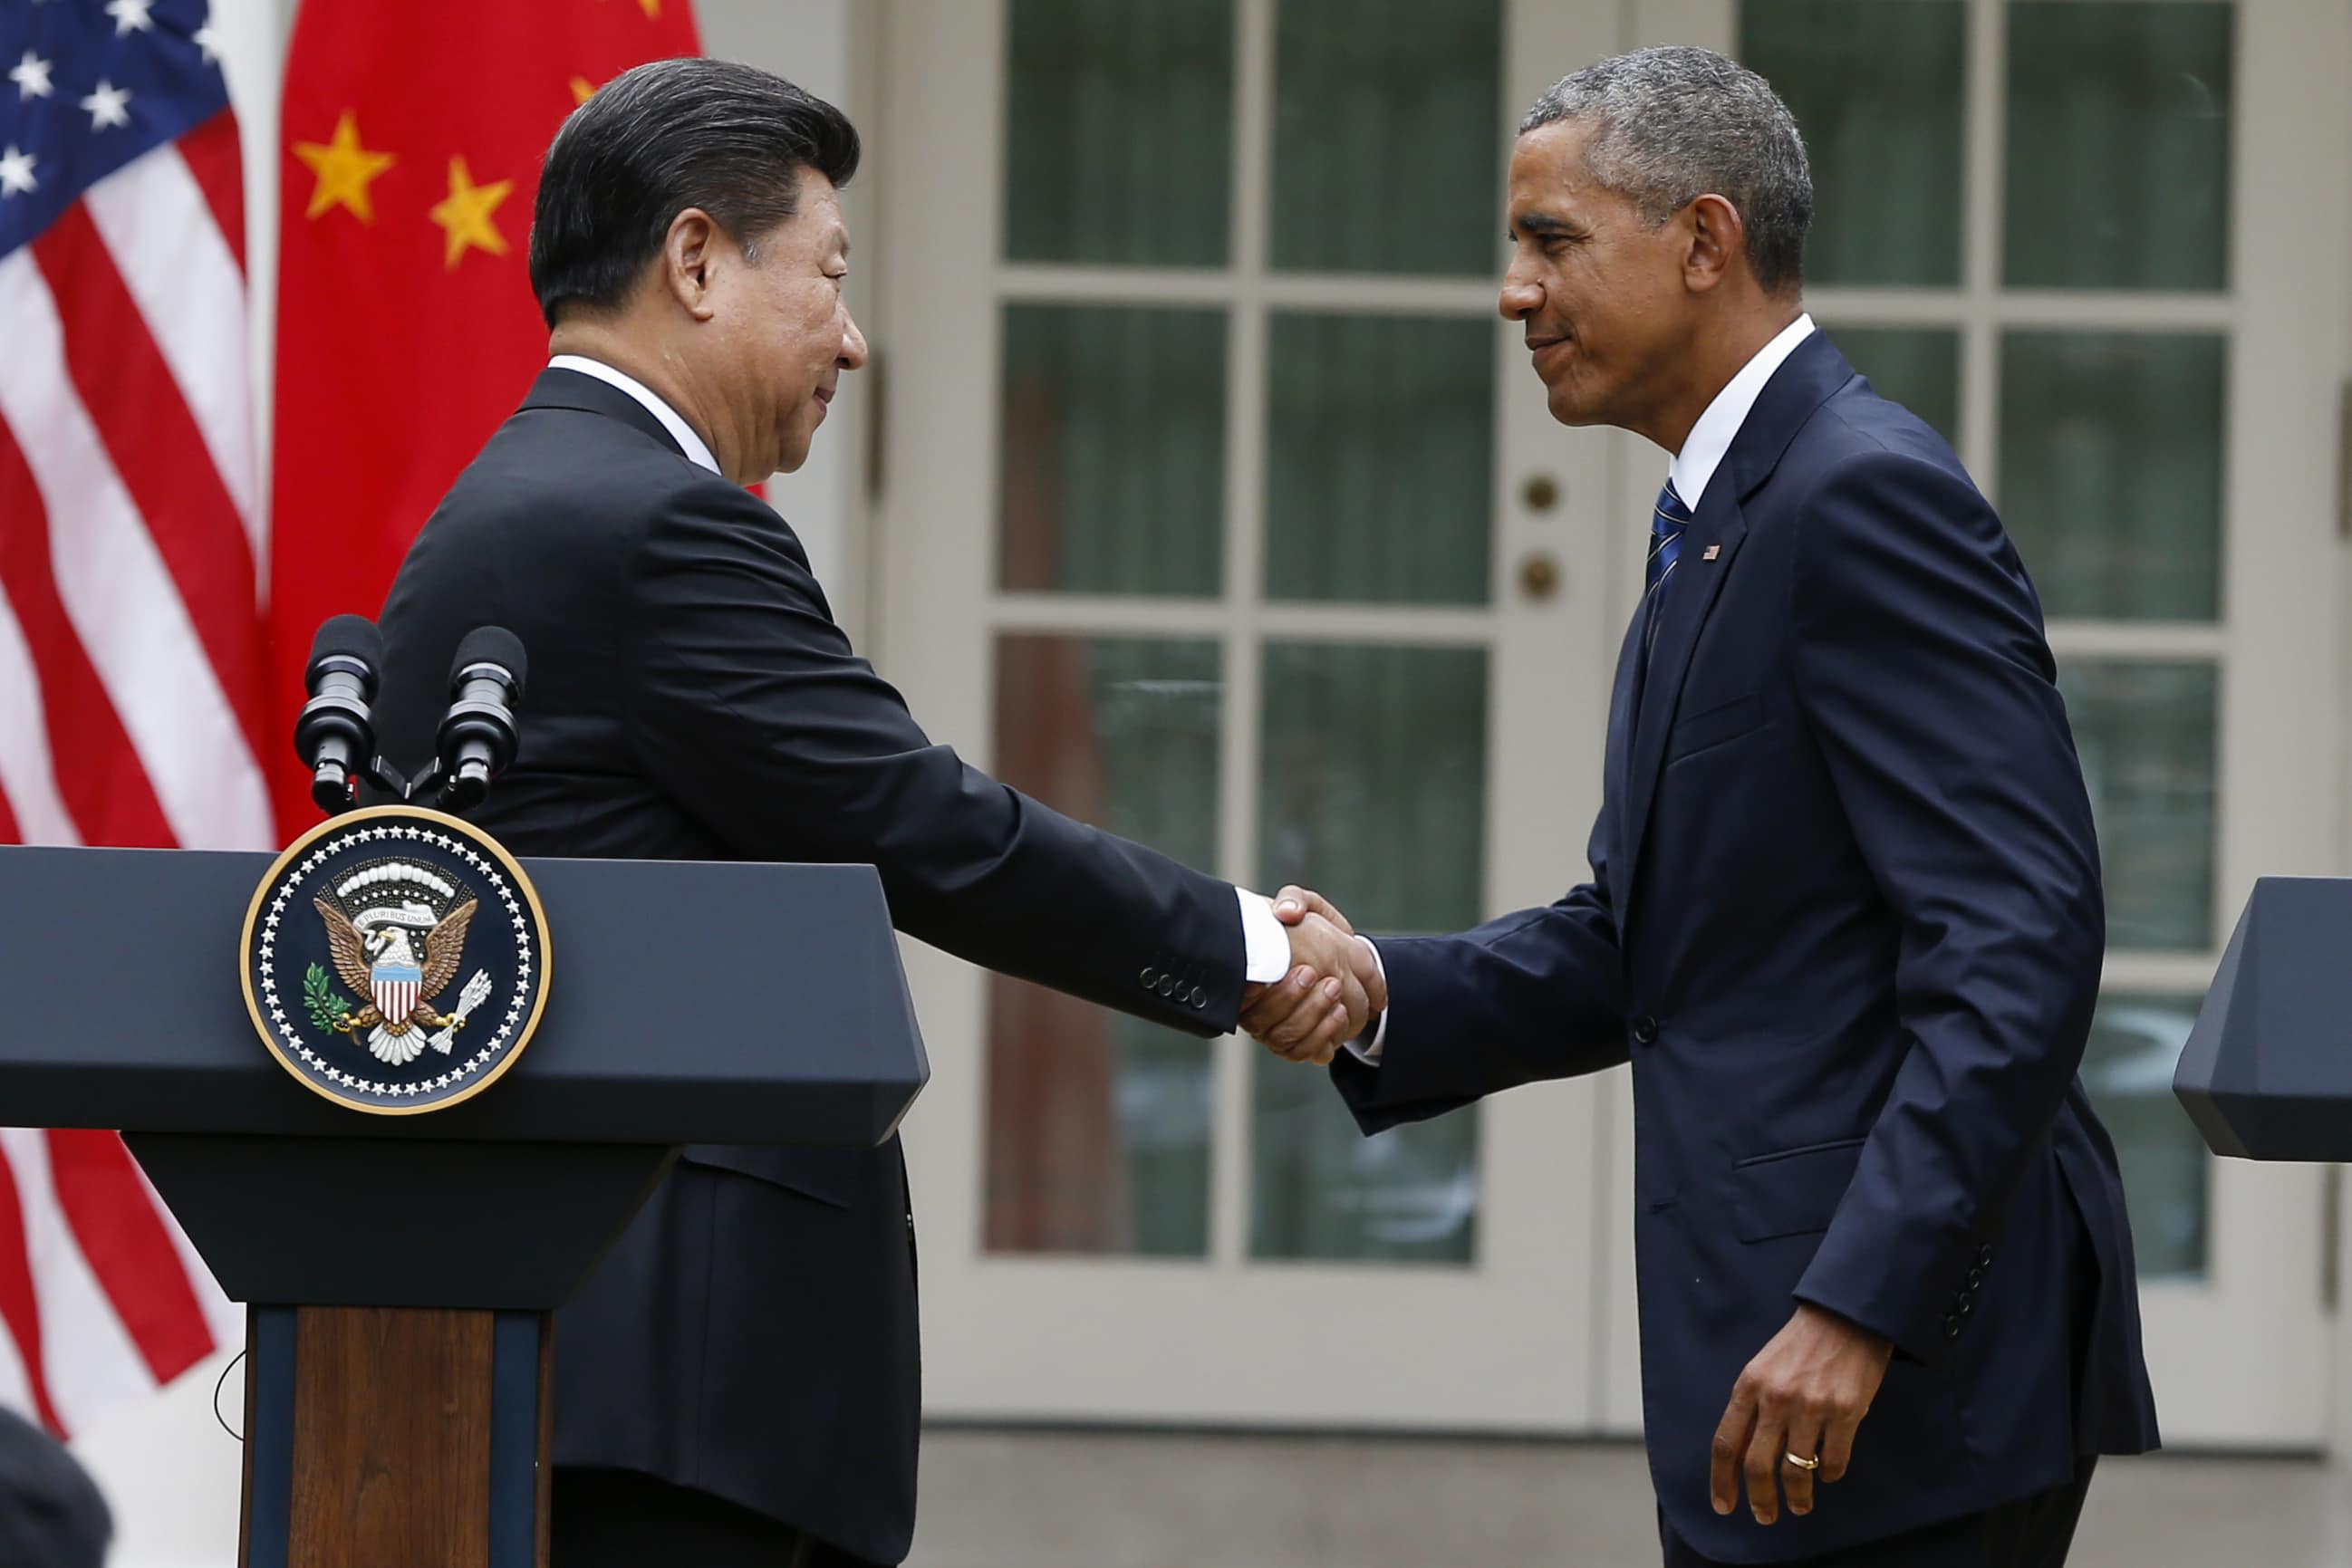 President Barack Obama shakes hands with Chinese President Xi Jinping after their joint news conference in the Rose Garden of the White House in Washington, 25 September 2015, AP Photo/Evan Vucci